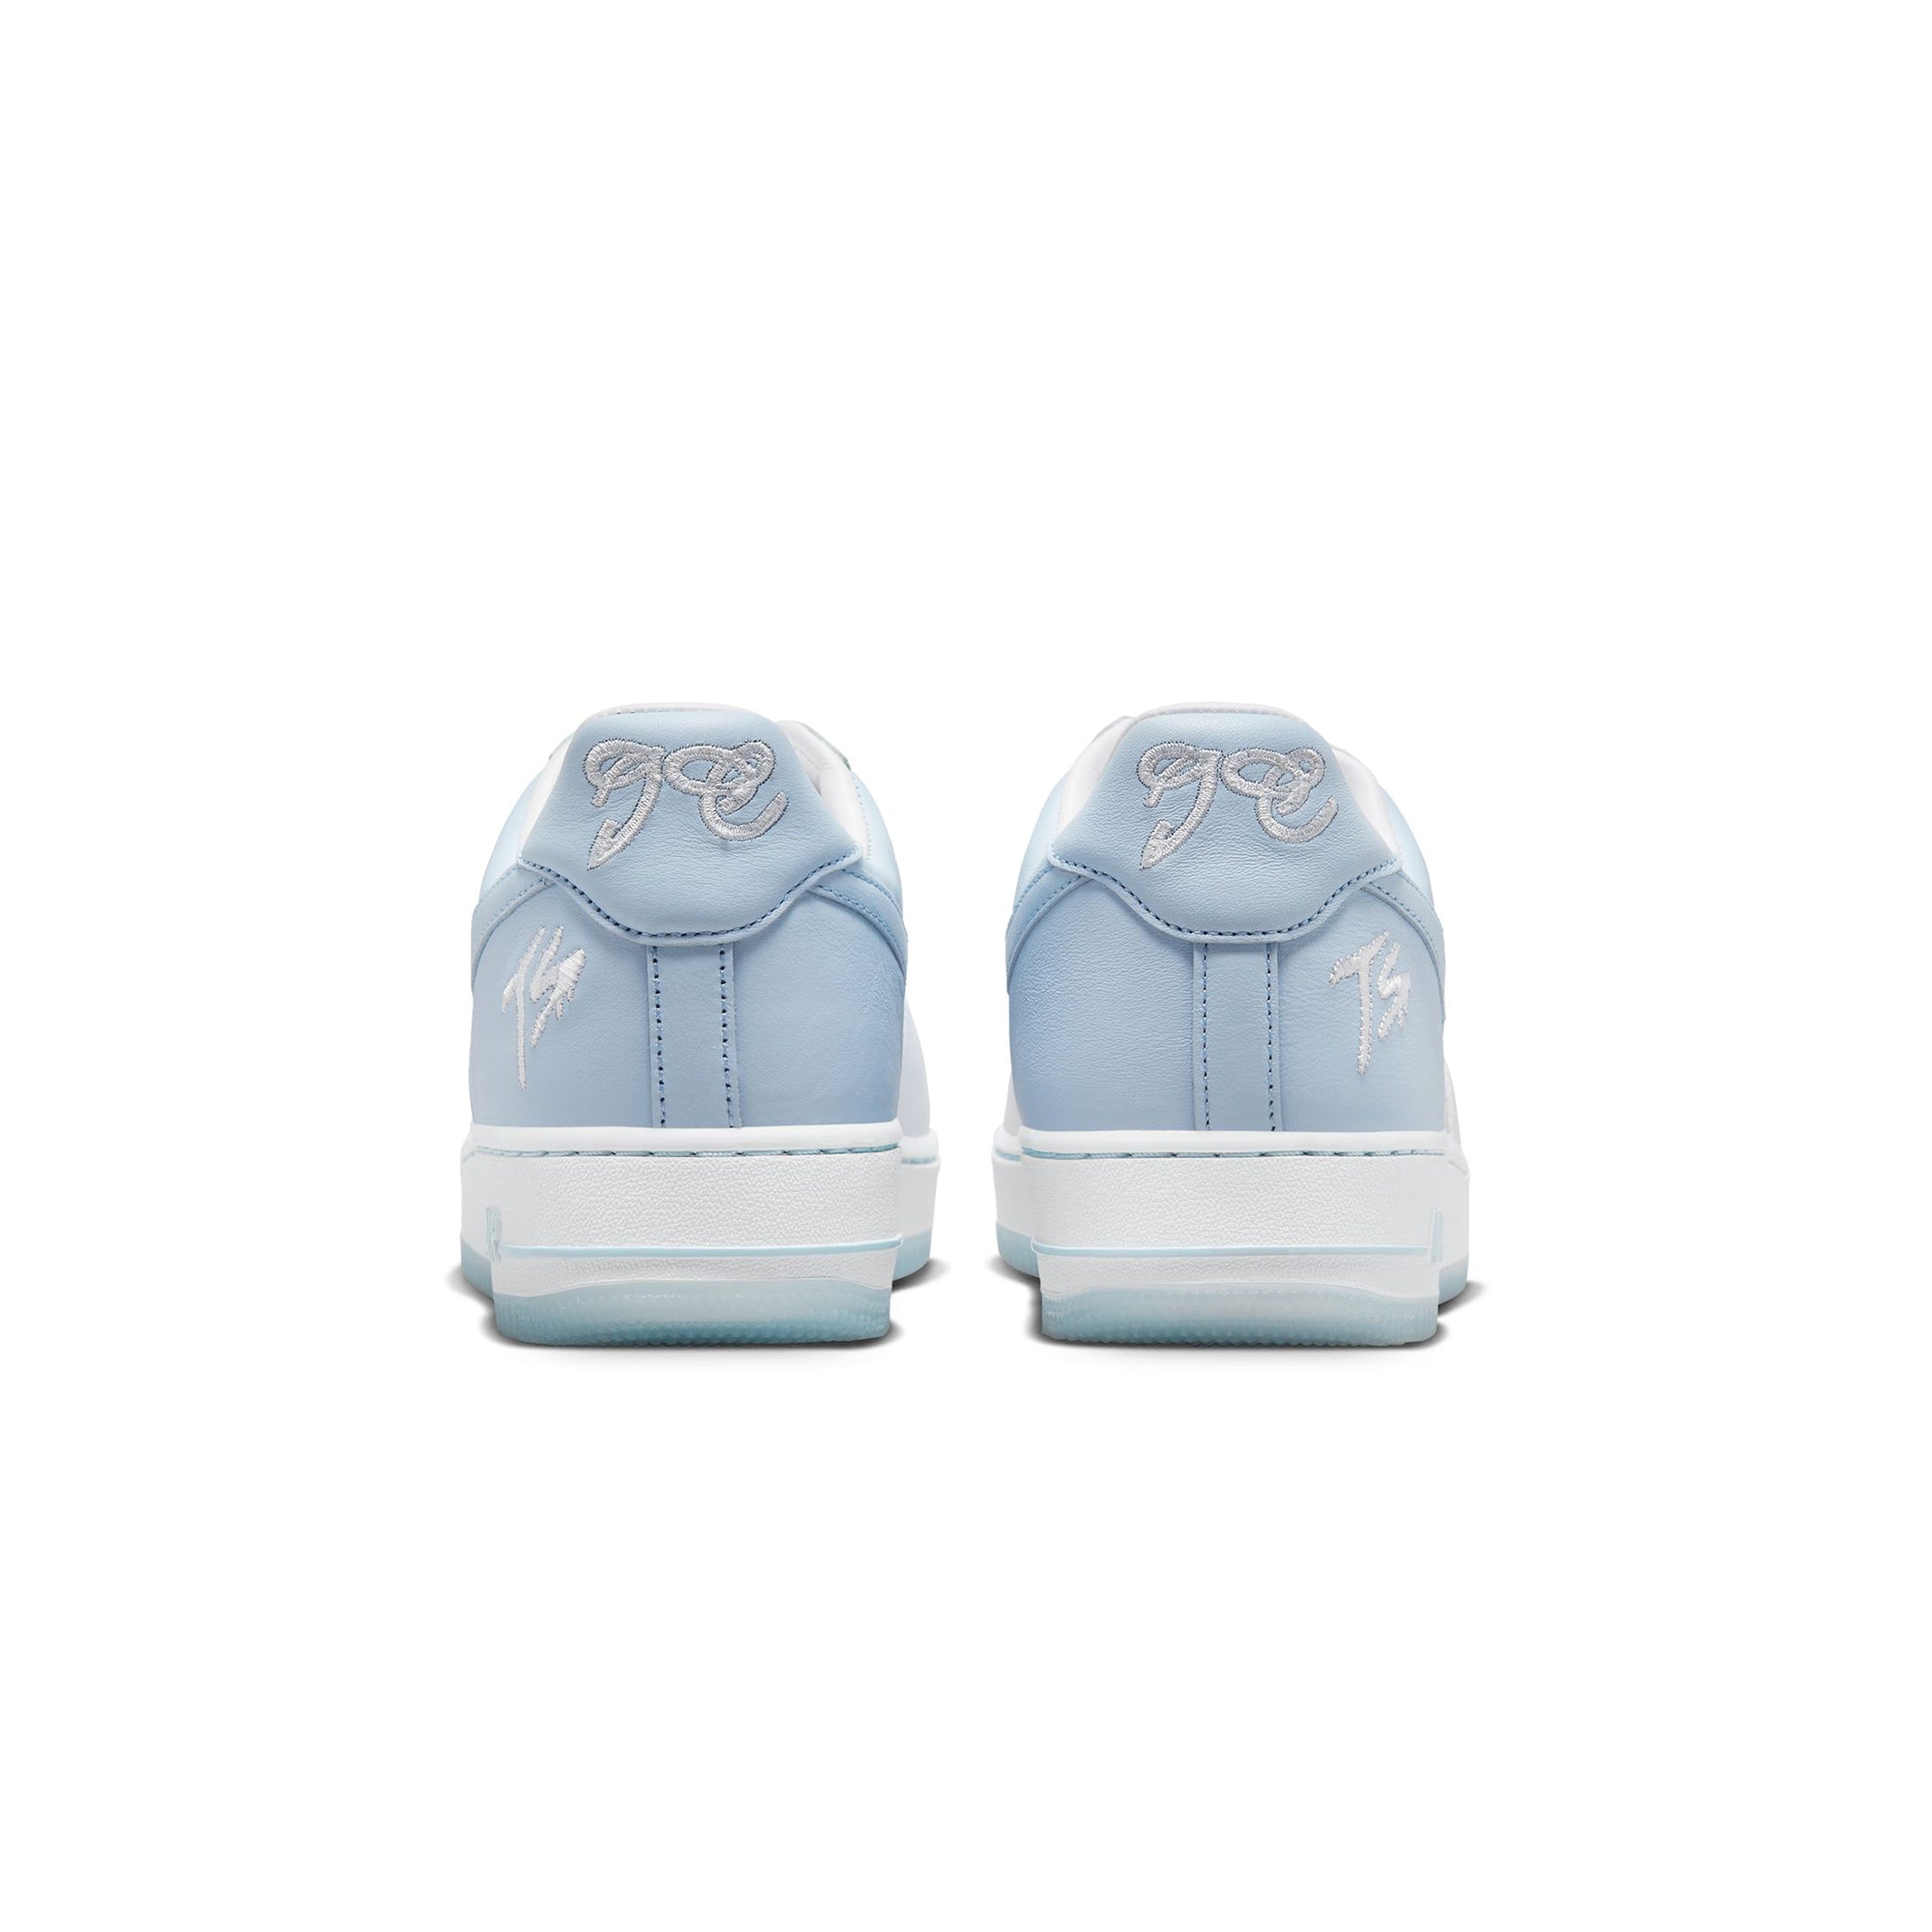 Nike x Terror Squad Air Force 1 Low QS Shoes – Extra Butter